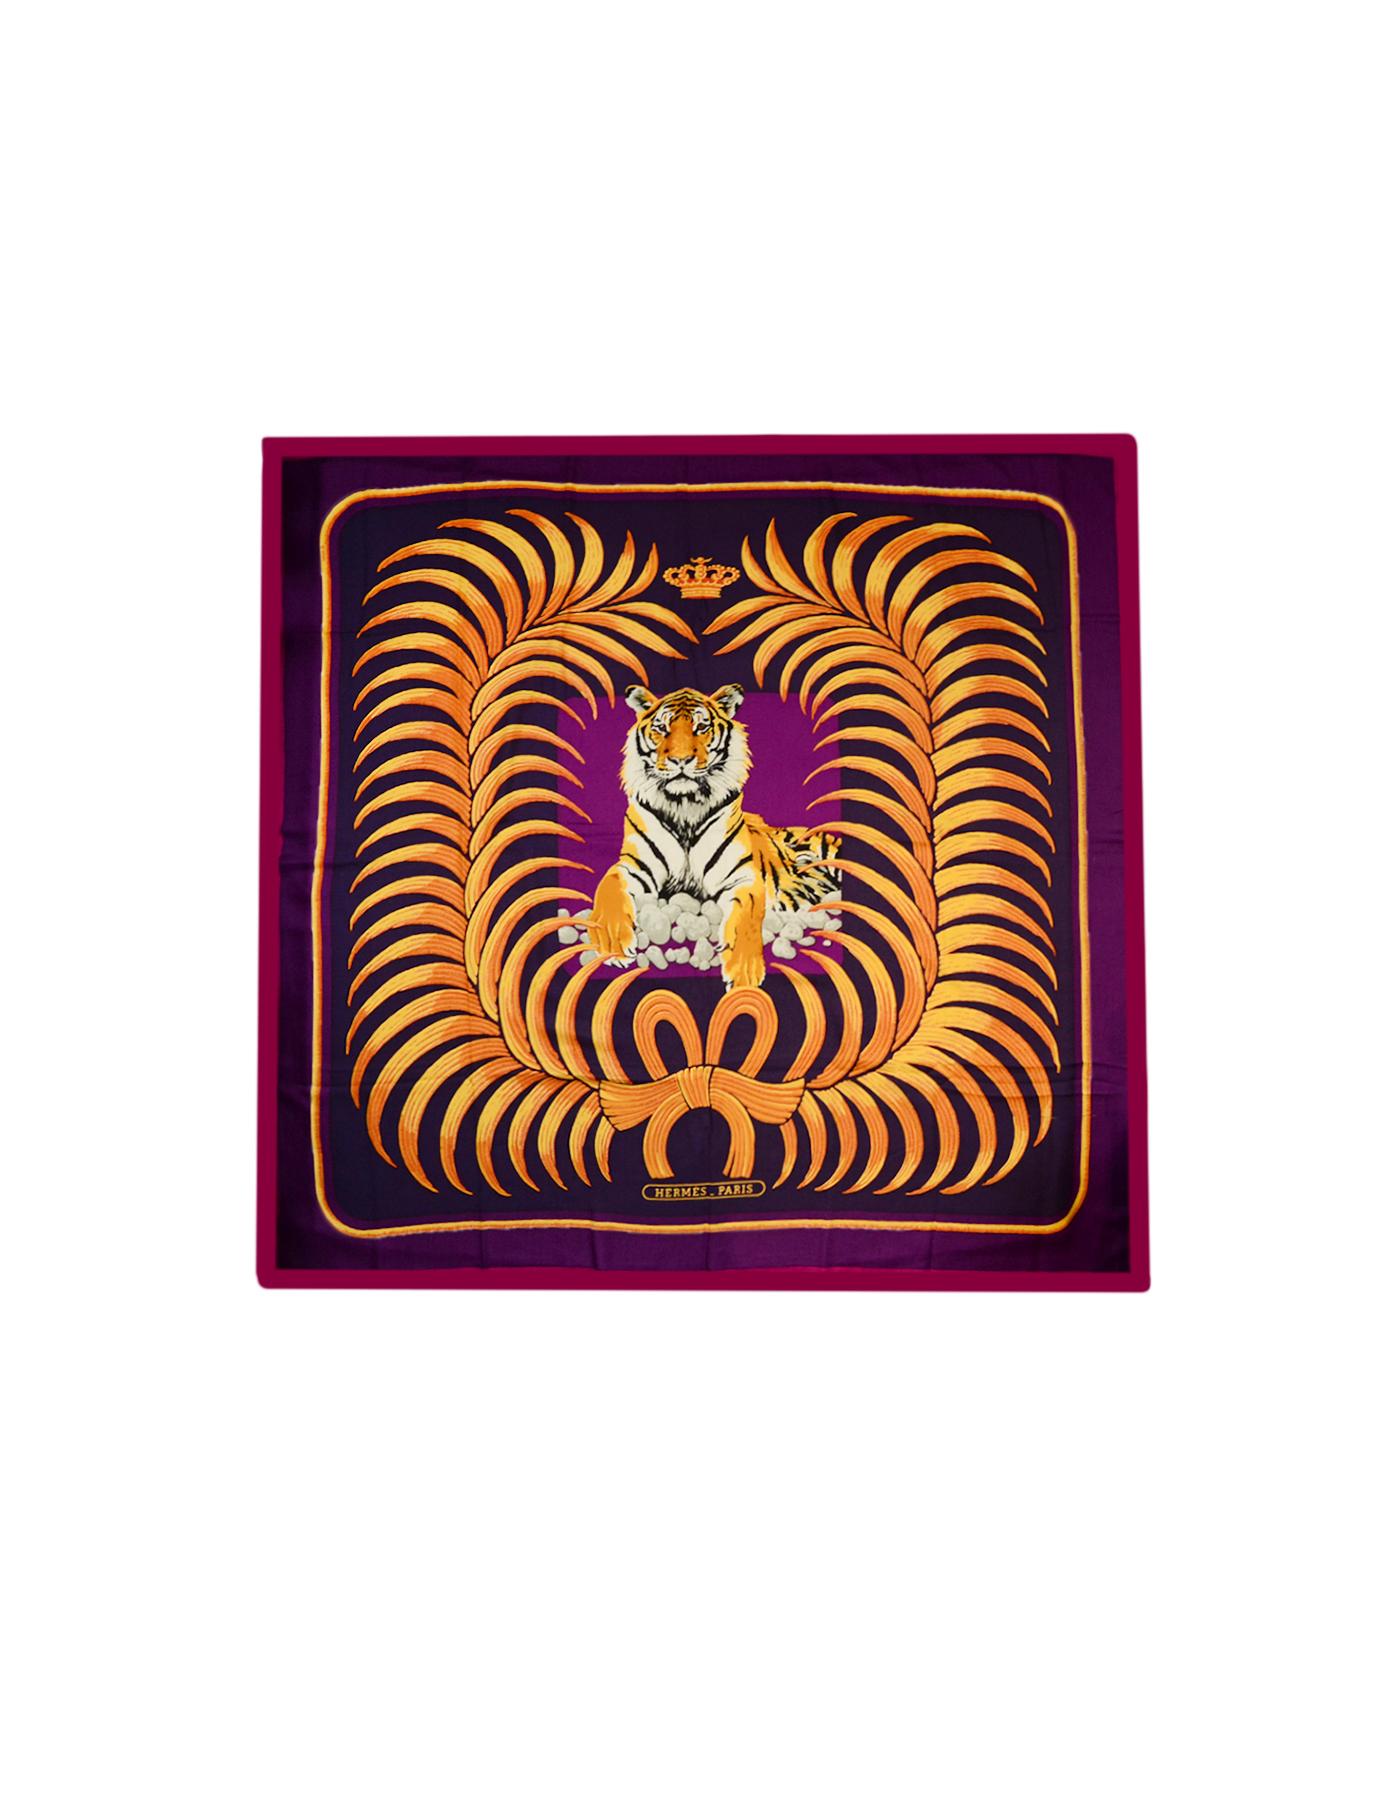 Hermes Purple Pink Royal Tiger Silk & Cashmere 140cm Shawl

Made In: France 
Color: Purple, Pink
Materials: 65% Cashmere, 35% Silk
Overall Condition: Excellent pre-owned condition, with the exception of a pull along the bottom right (See